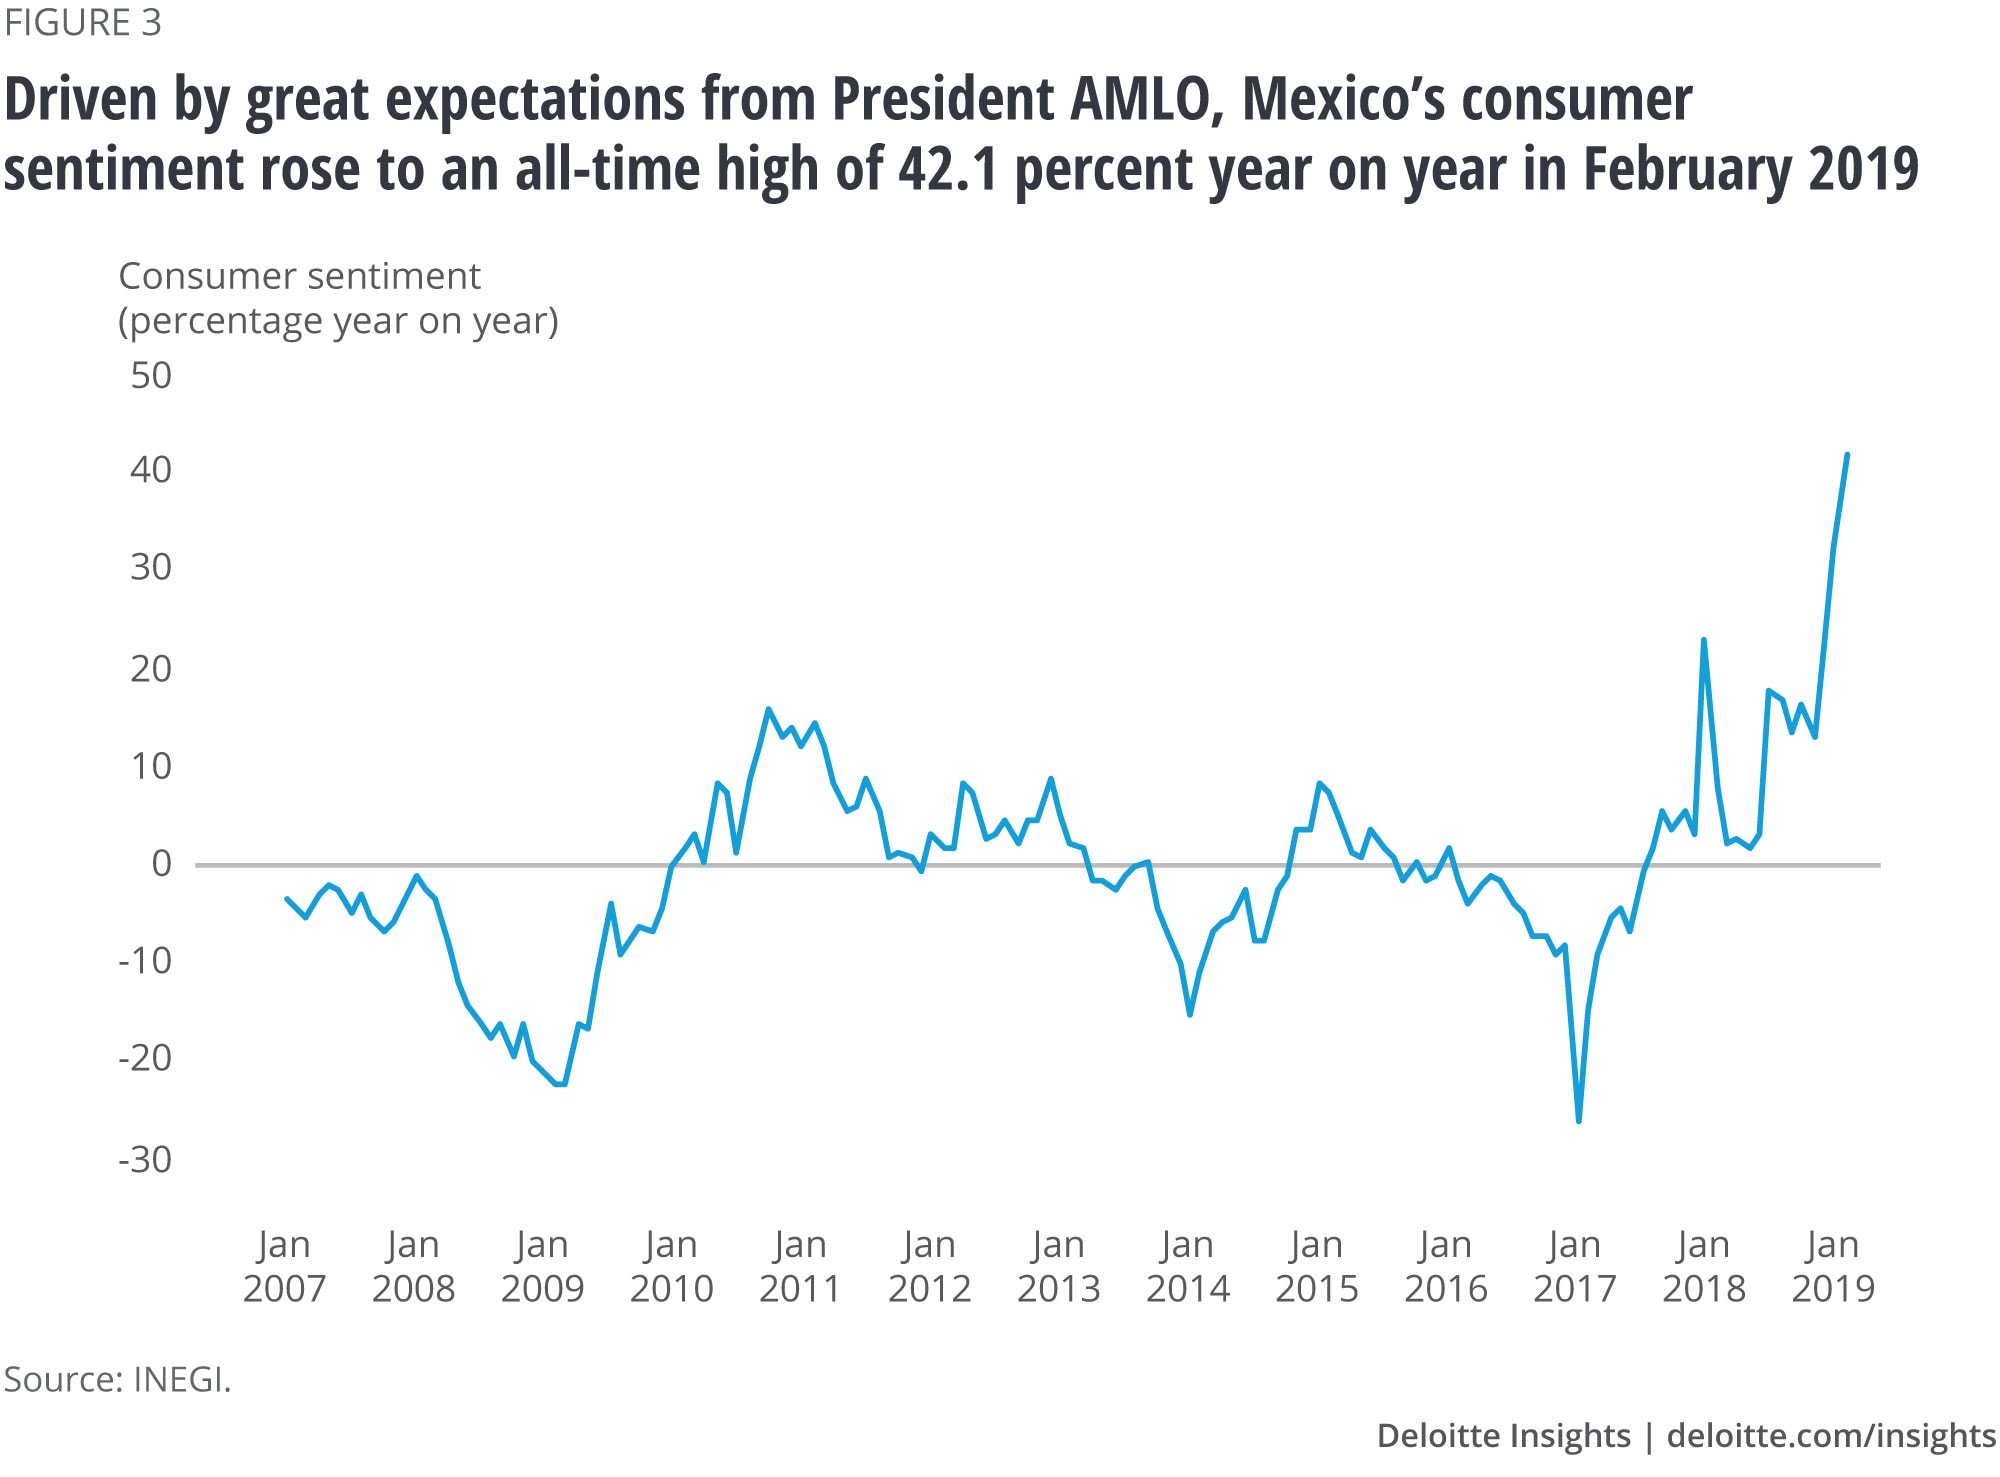 Driven by great expectations from President AMLO, Mexico’s consumer sentiment rose to an all-time high of 42.1 percent year on year in February 2019